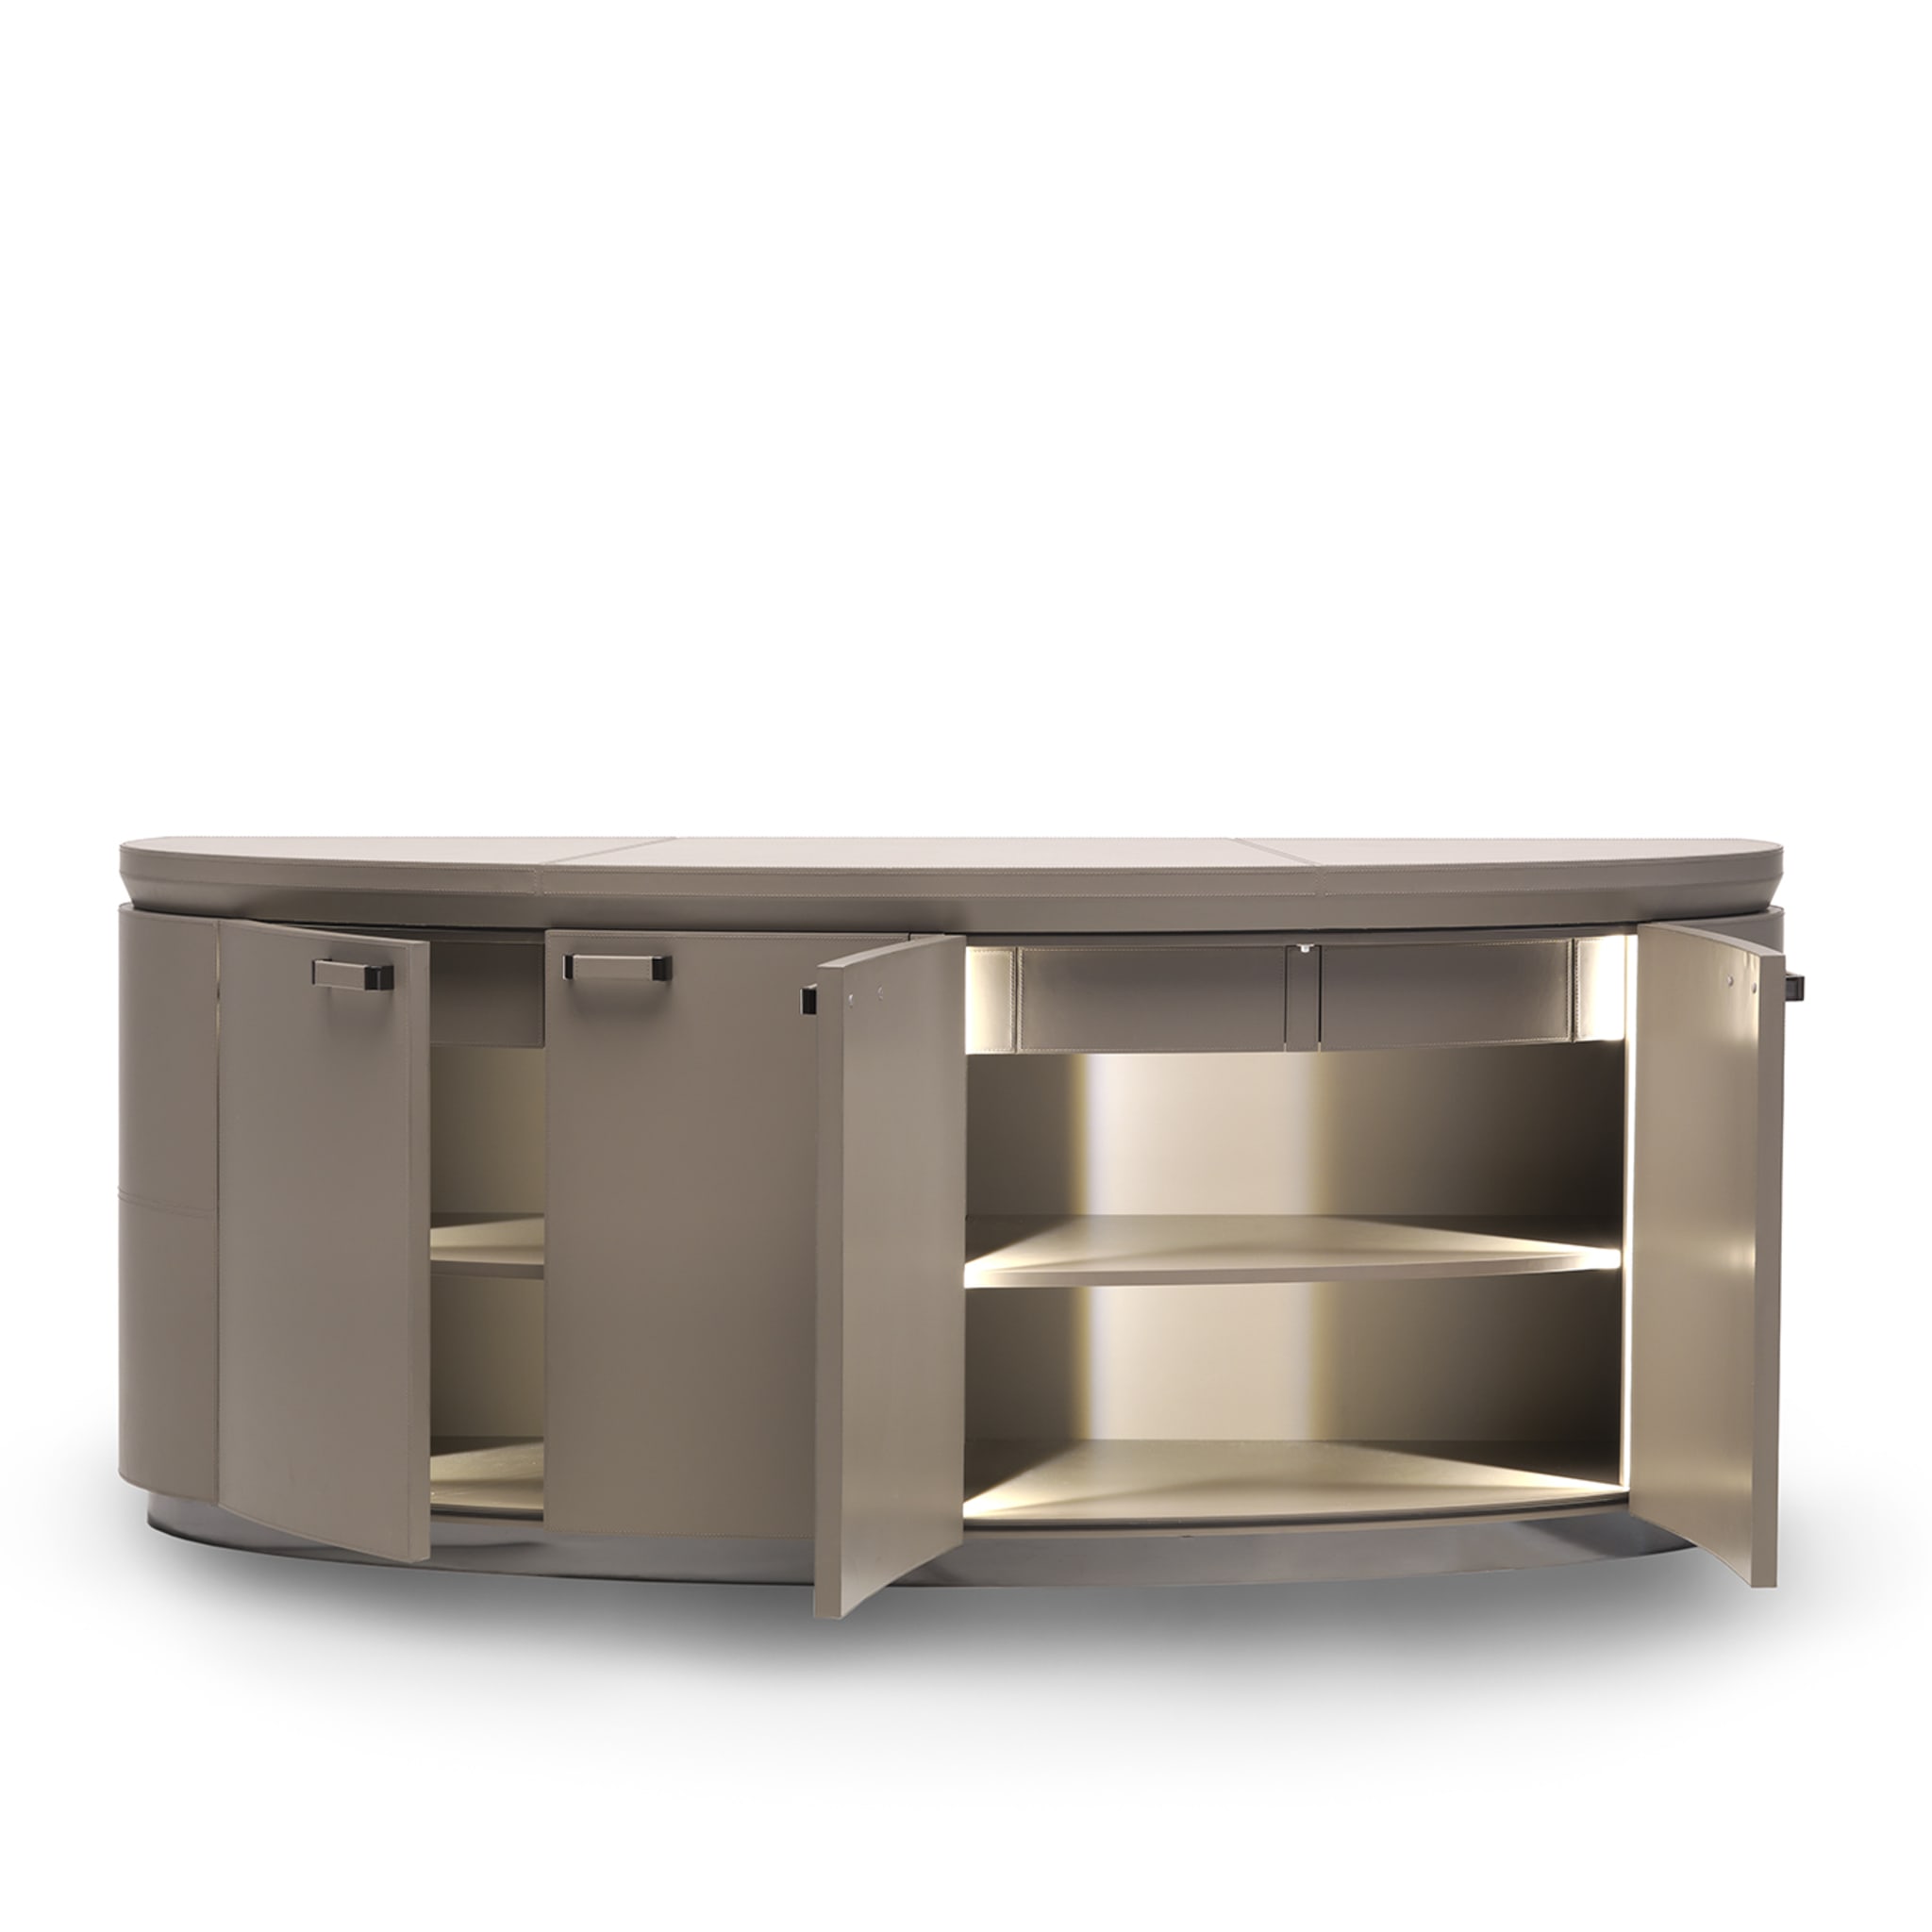 Athina Sideboard - Alternative view 1